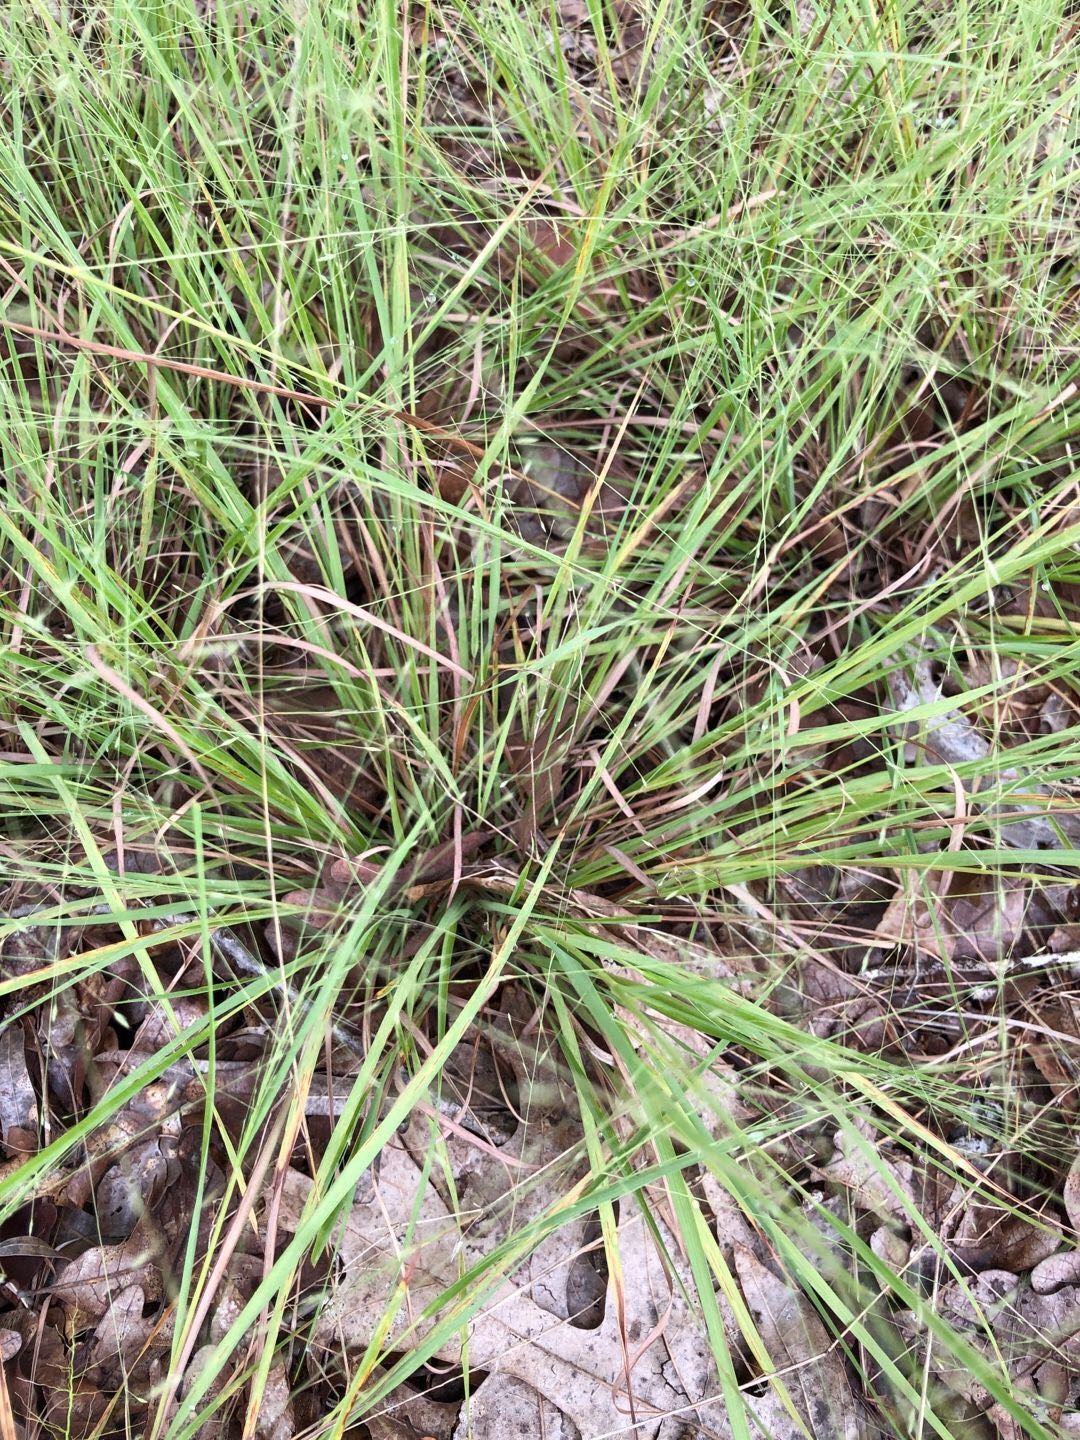 The Scientific Name is Eragrostis spectabilis. You will likely hear them called Purple Lovegrass, Tumblegrass, Petticoat Climber. This picture shows the The grass clumps are relatively short and broad. of Eragrostis spectabilis